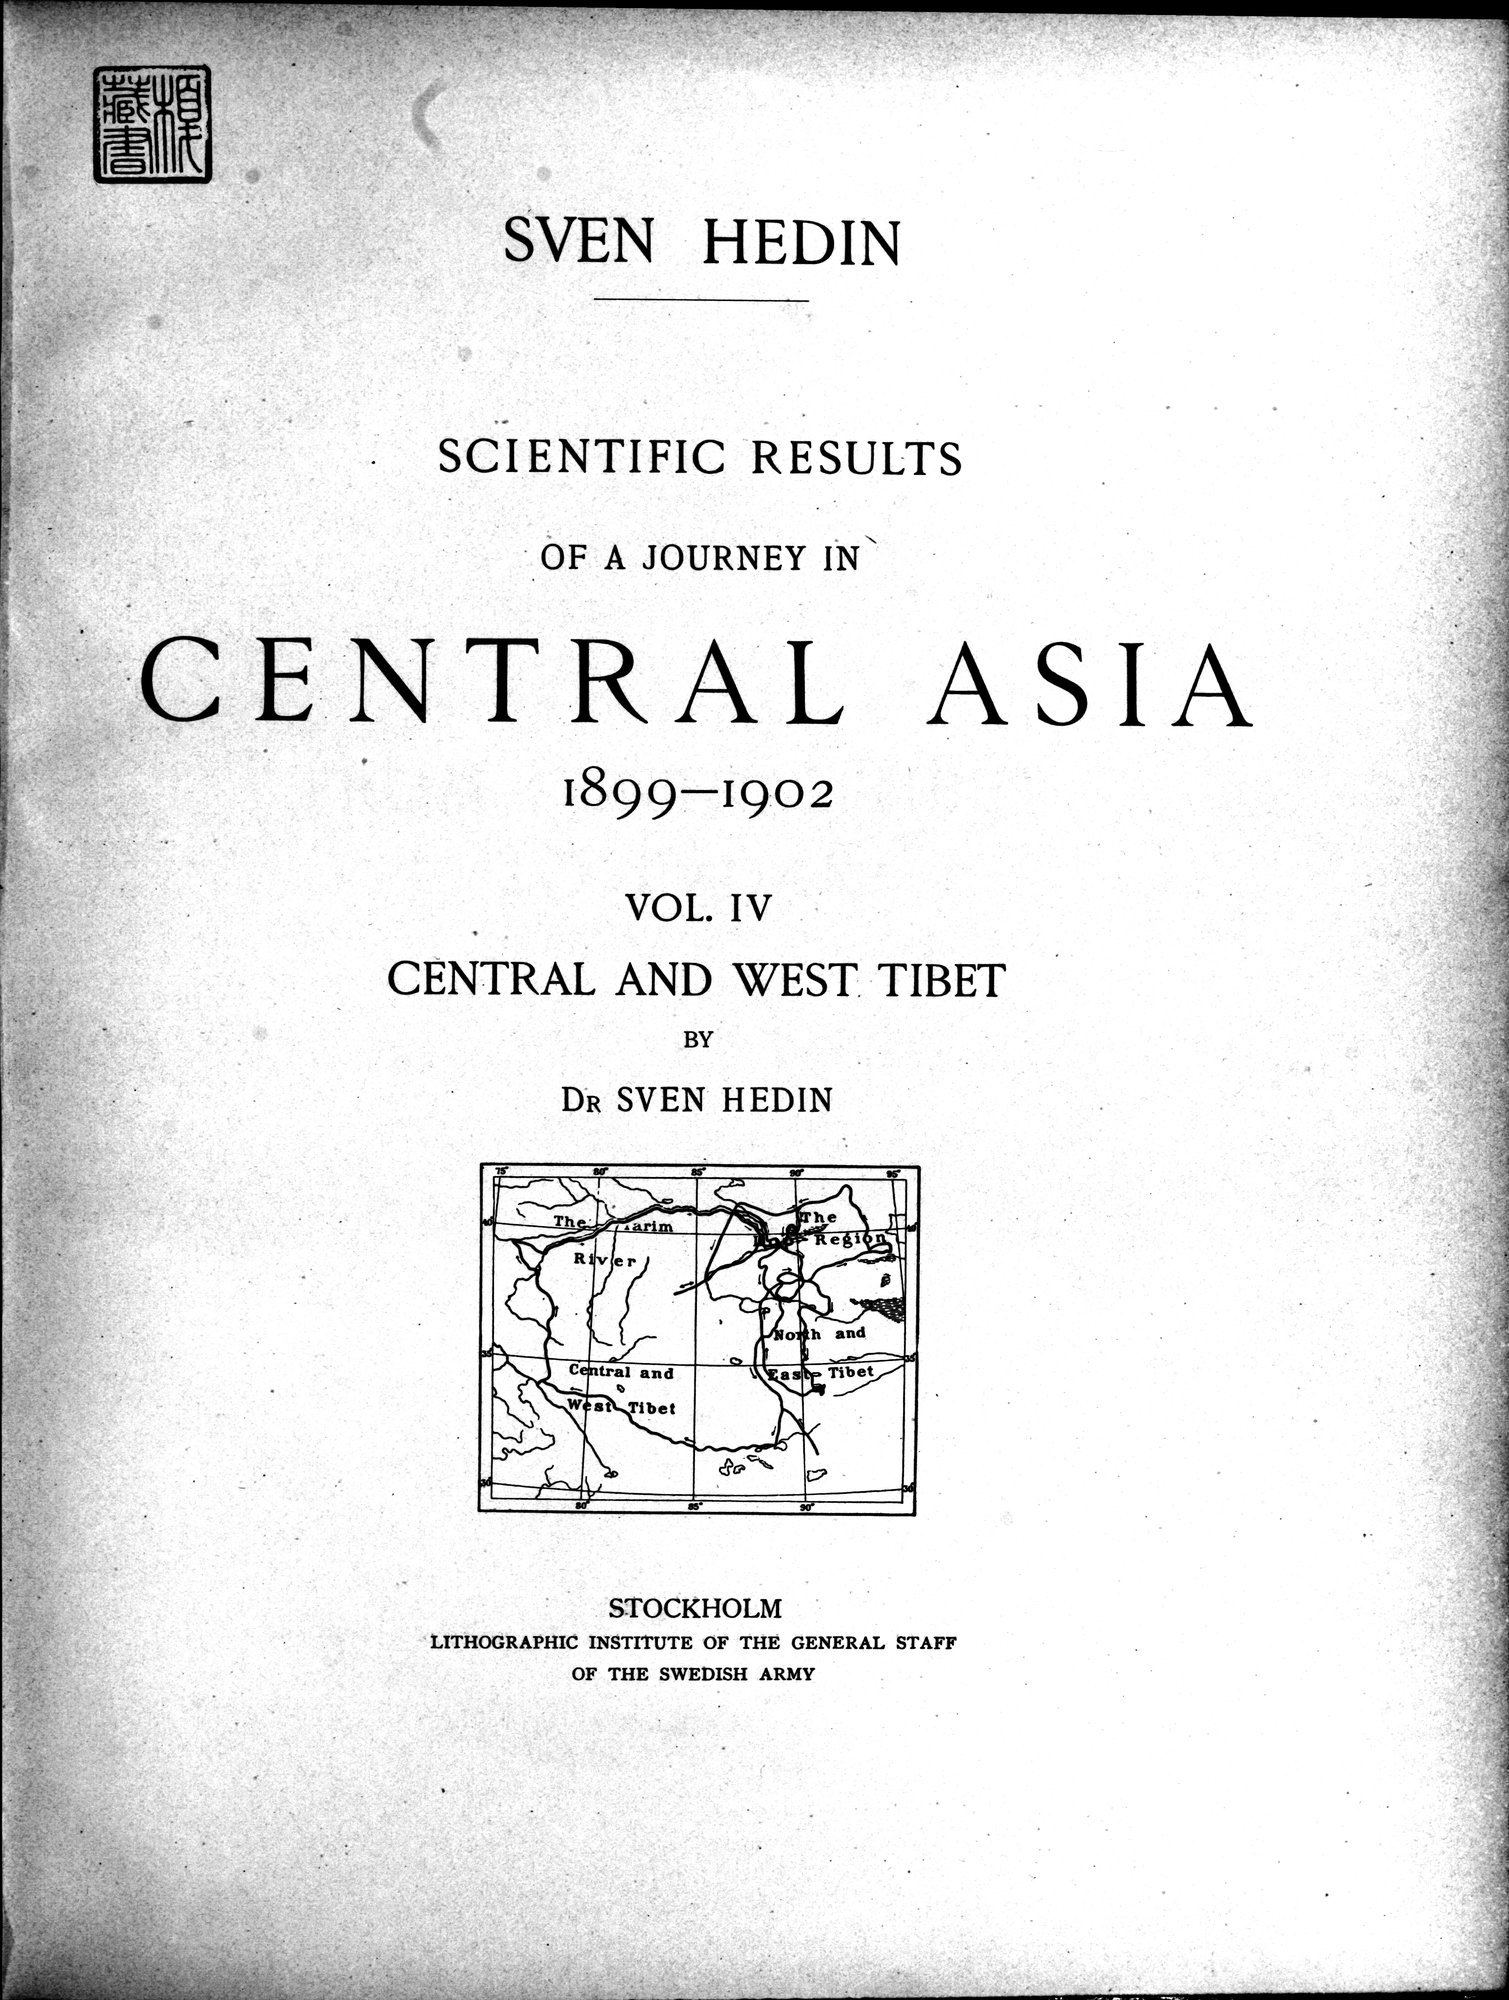 Scientific Results of a Journey in Central Asia, 1899-1902 : vol.4 / 9 ページ（白黒高解像度画像）